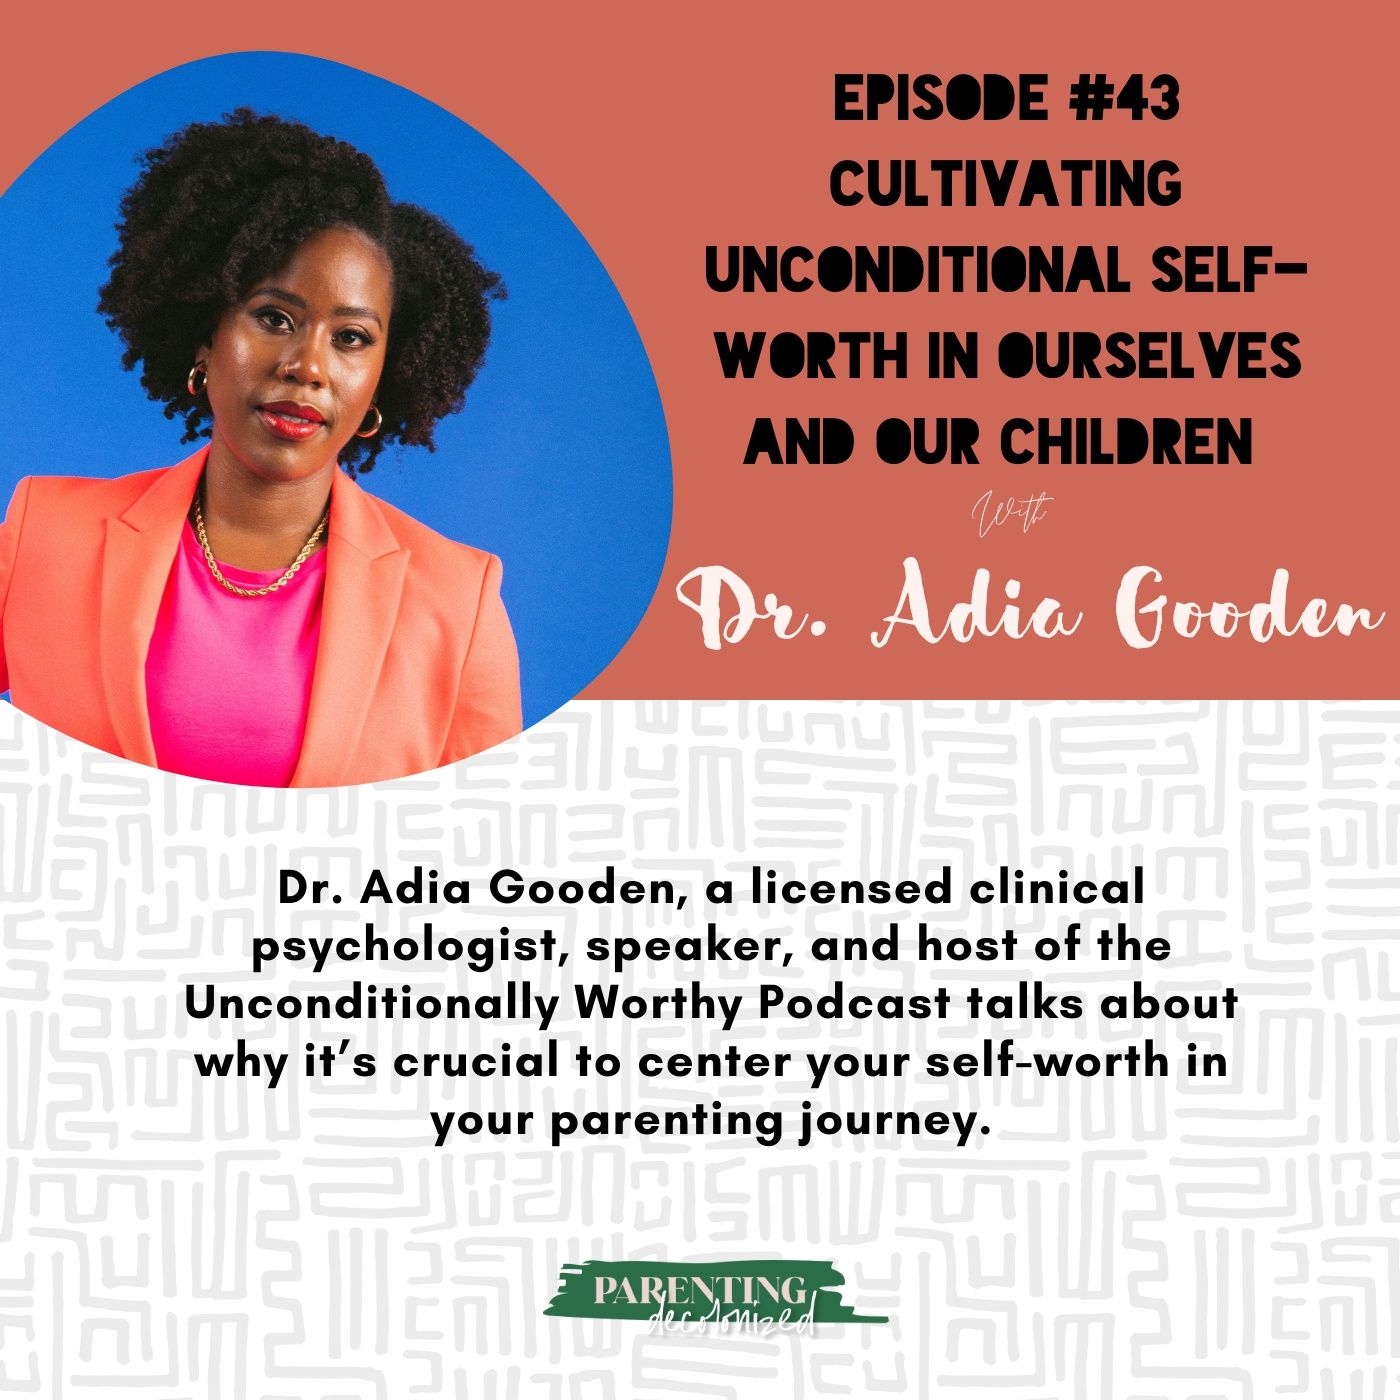 43. Cultivating Unconditional Self-Worth in Ourselves and Our Children with Dr. Adia Gooden